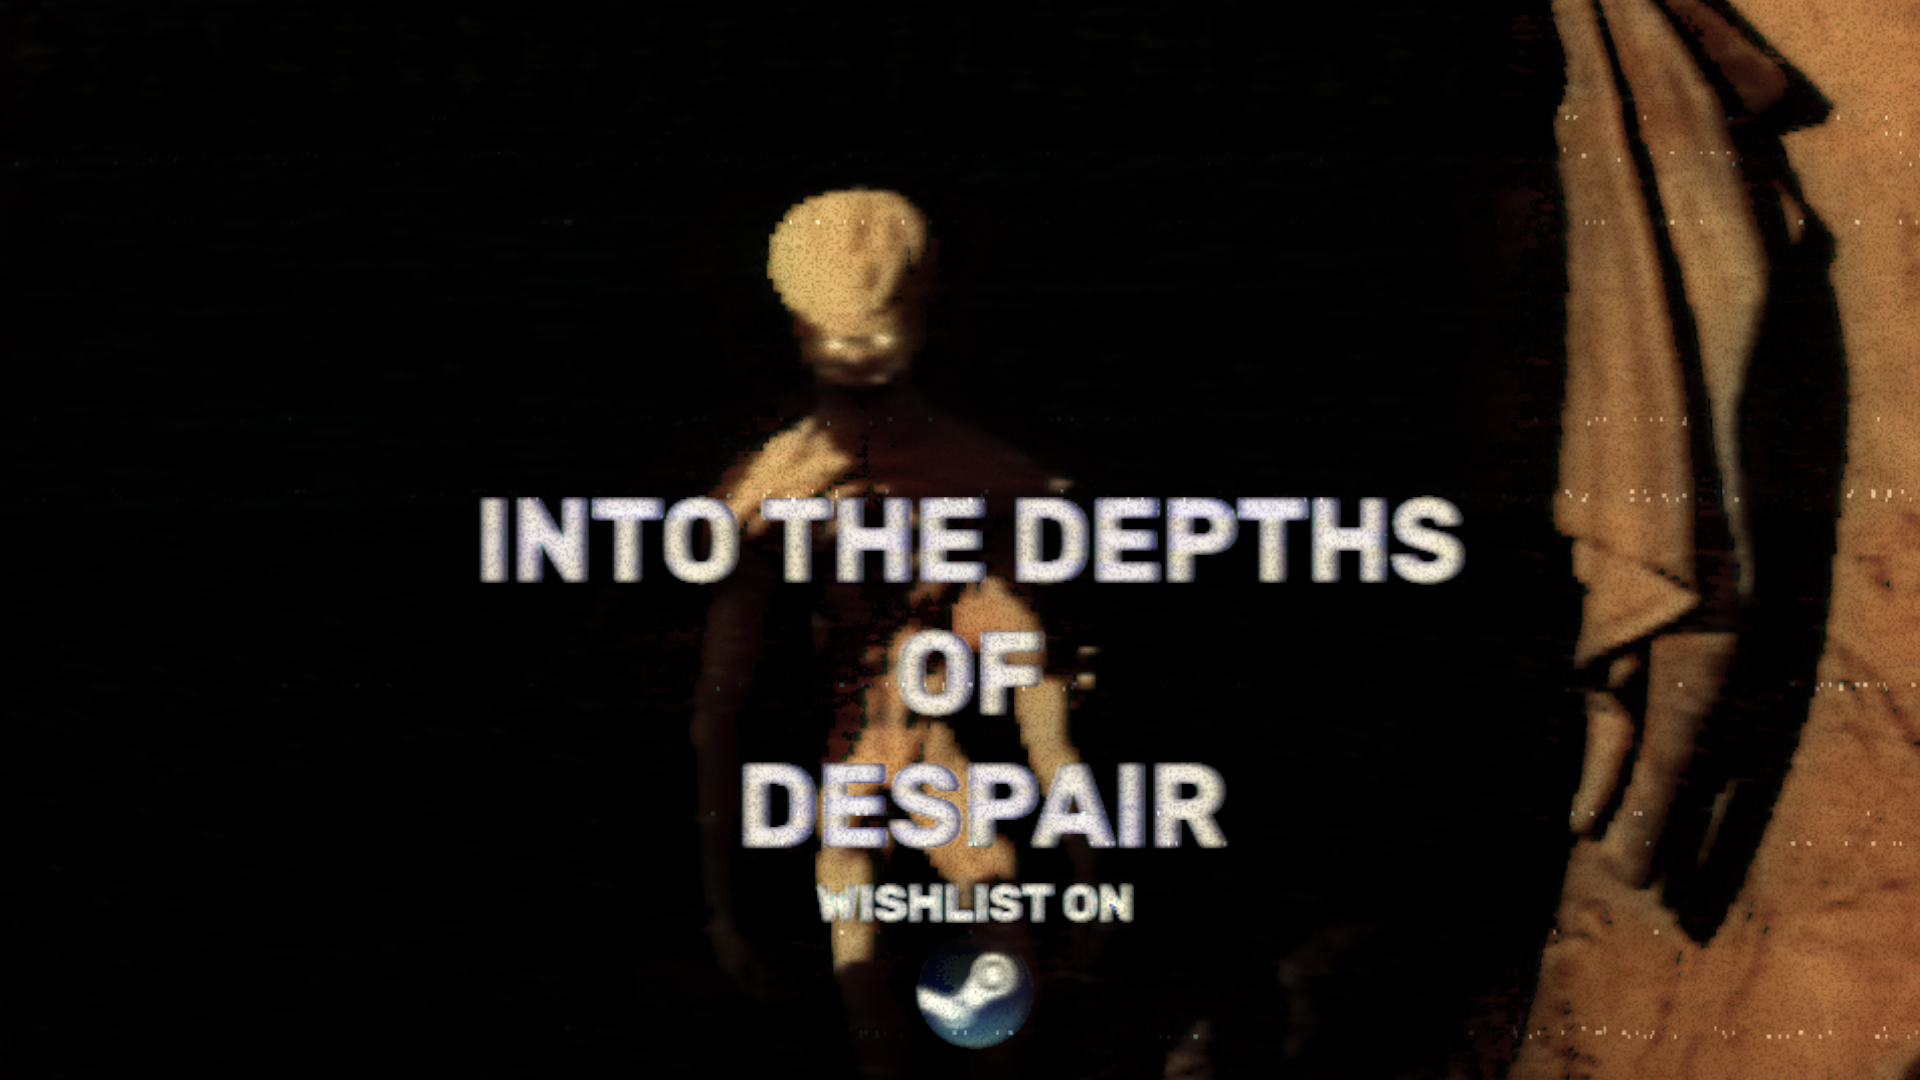 “Into the Depths of Despair” is now available for wishlist on Steam.